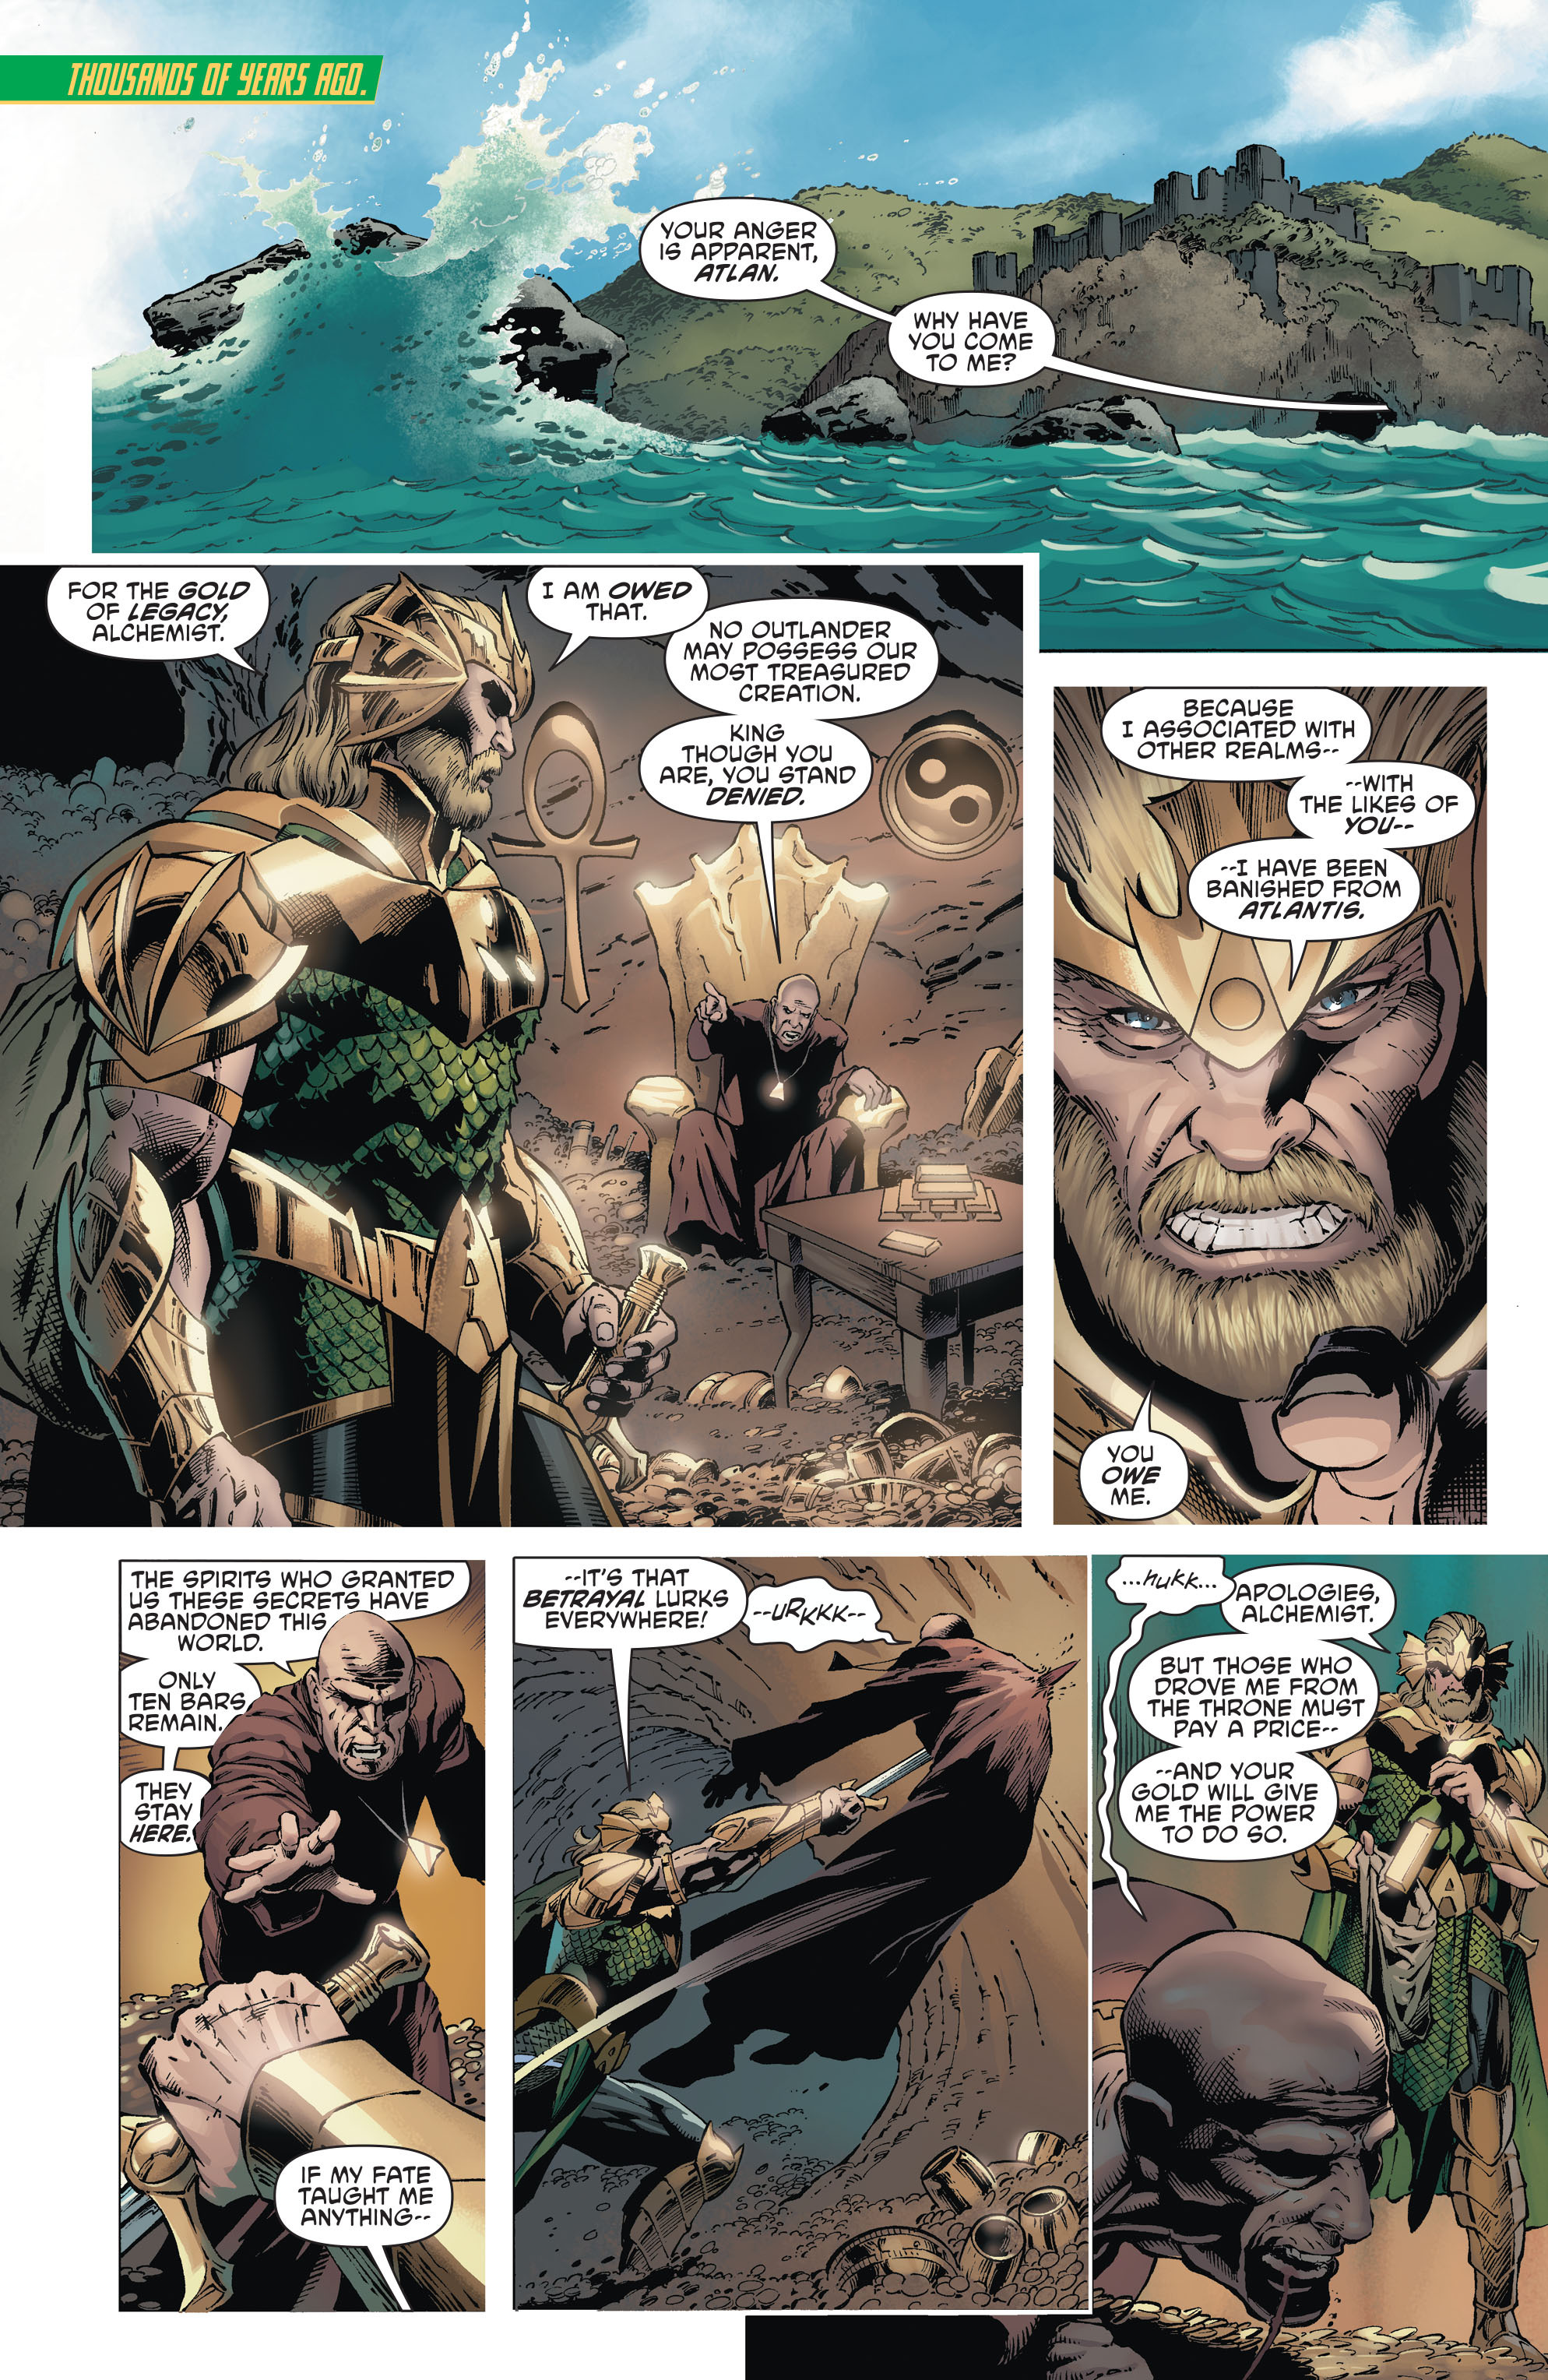 Aquaman and the Others (2014-2015) (New 52): Chapter 1 - Page 2